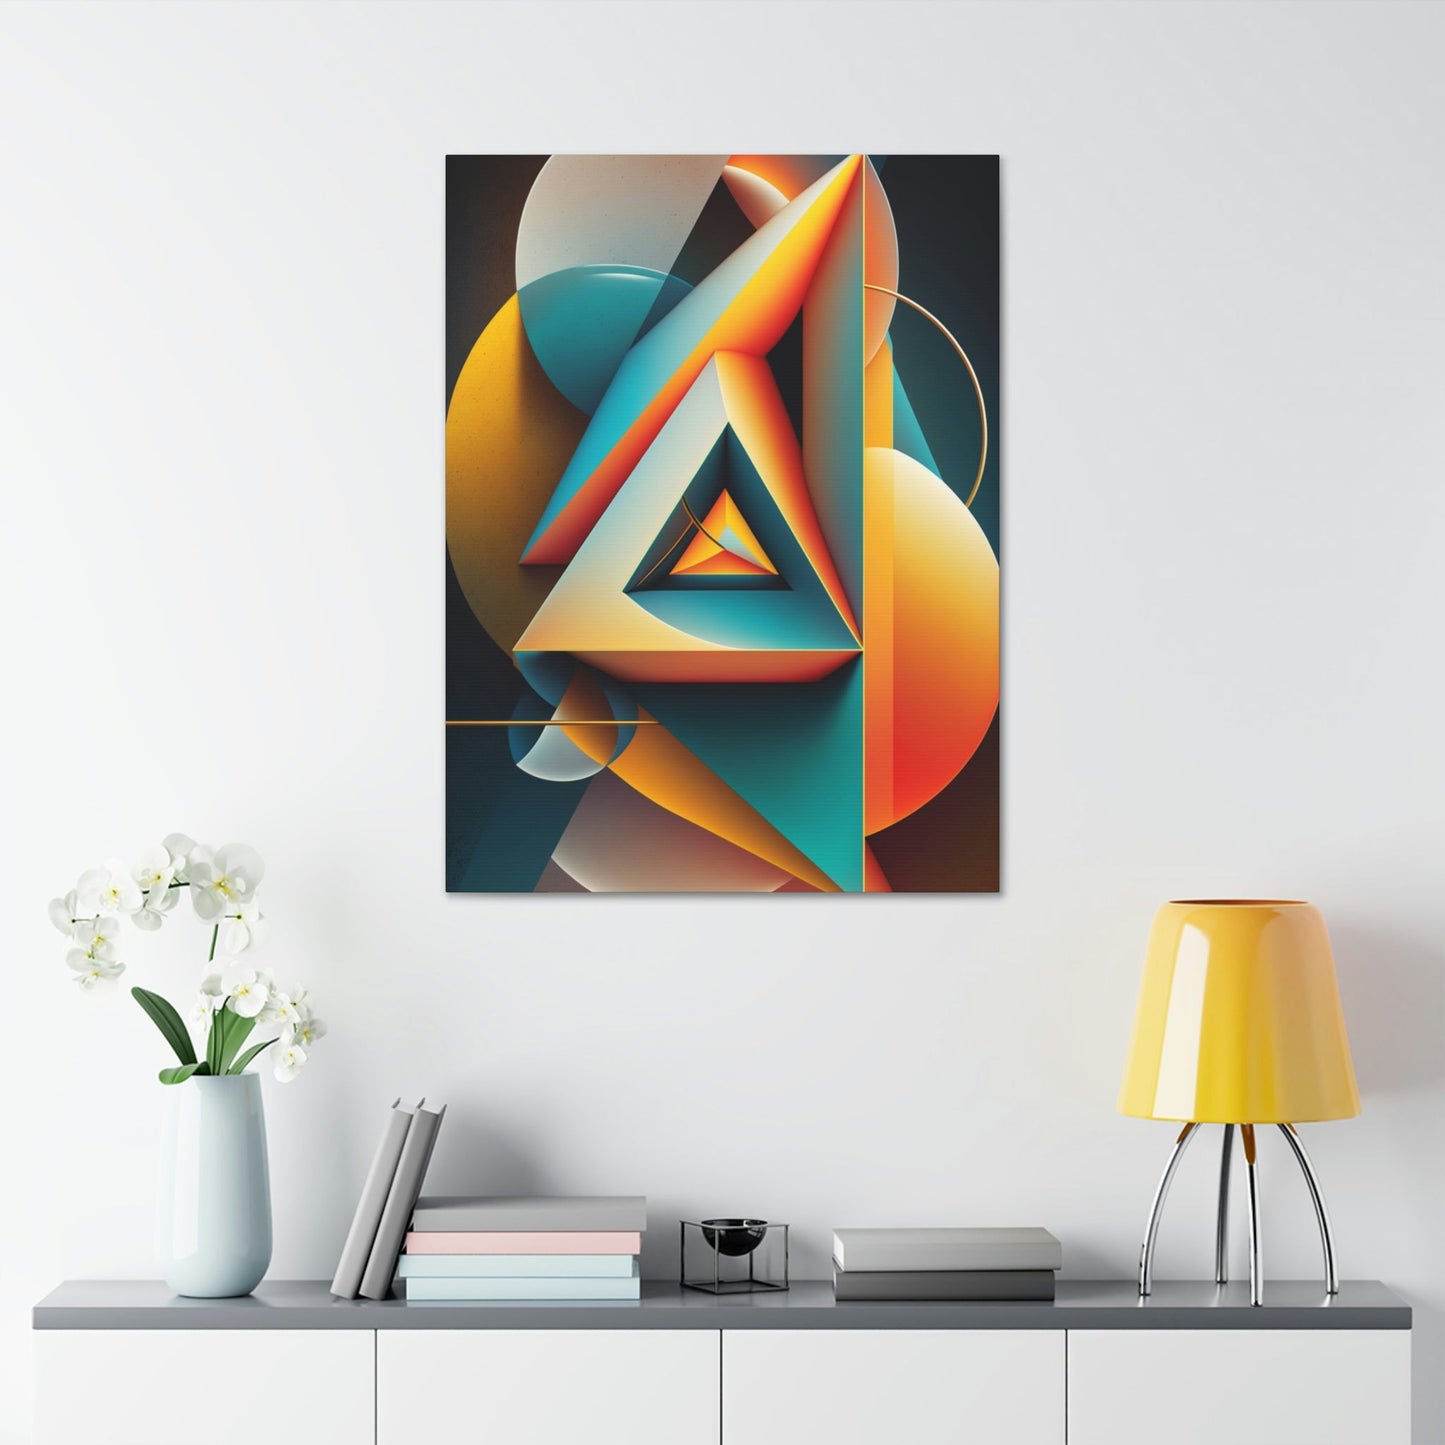 Bold Geometric Print: Canvas Art That Commands Attention